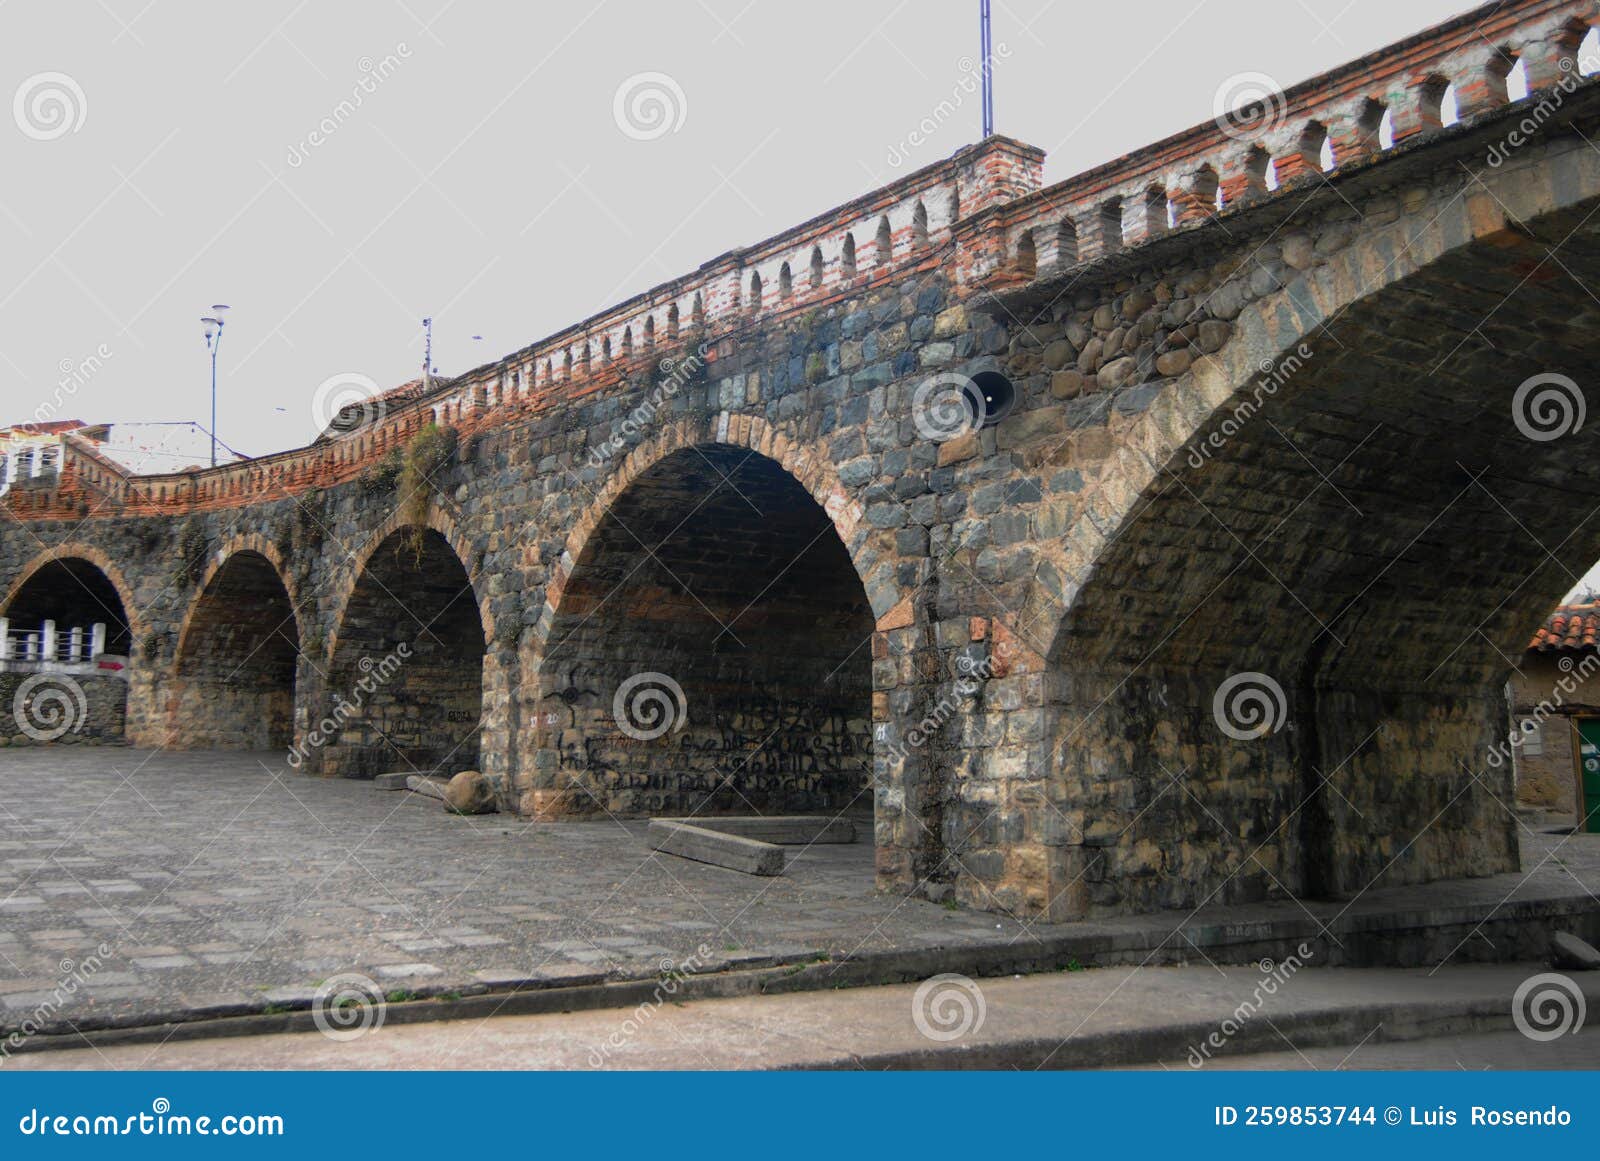 broken bridge or puento roto, constracted in 1840, destroyed by a flood and partially restored as a tourist site., cuenca, azuay